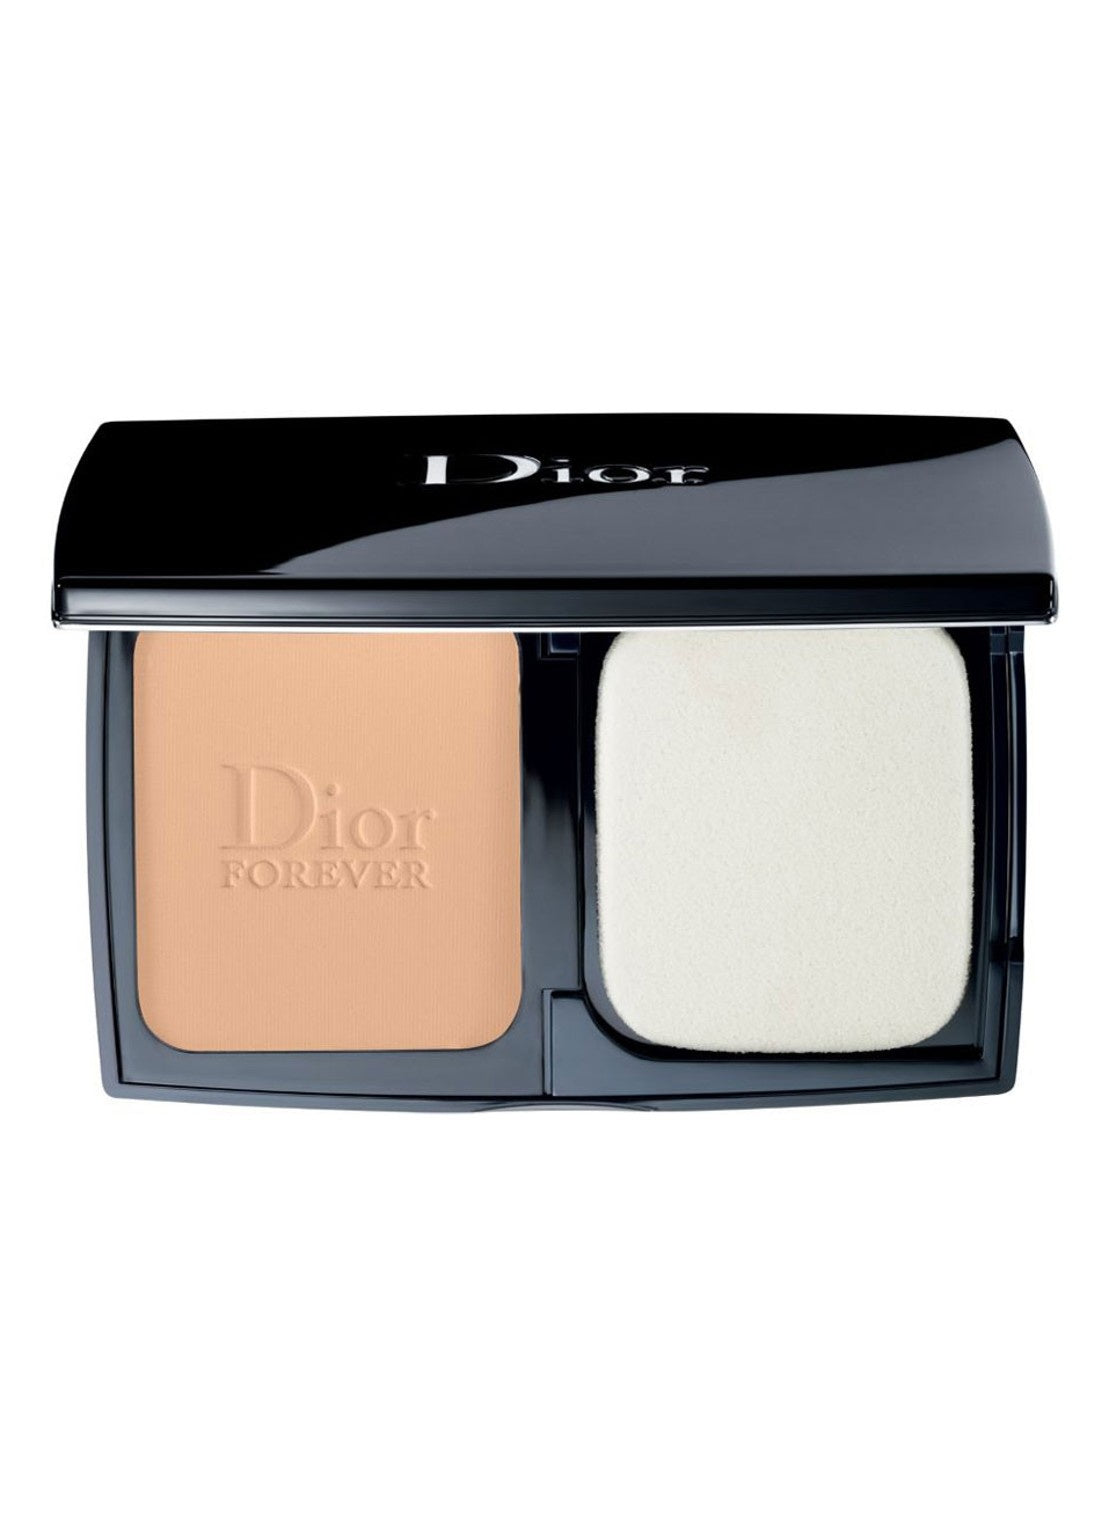 Diorskin Forever Extreme Control Foundation